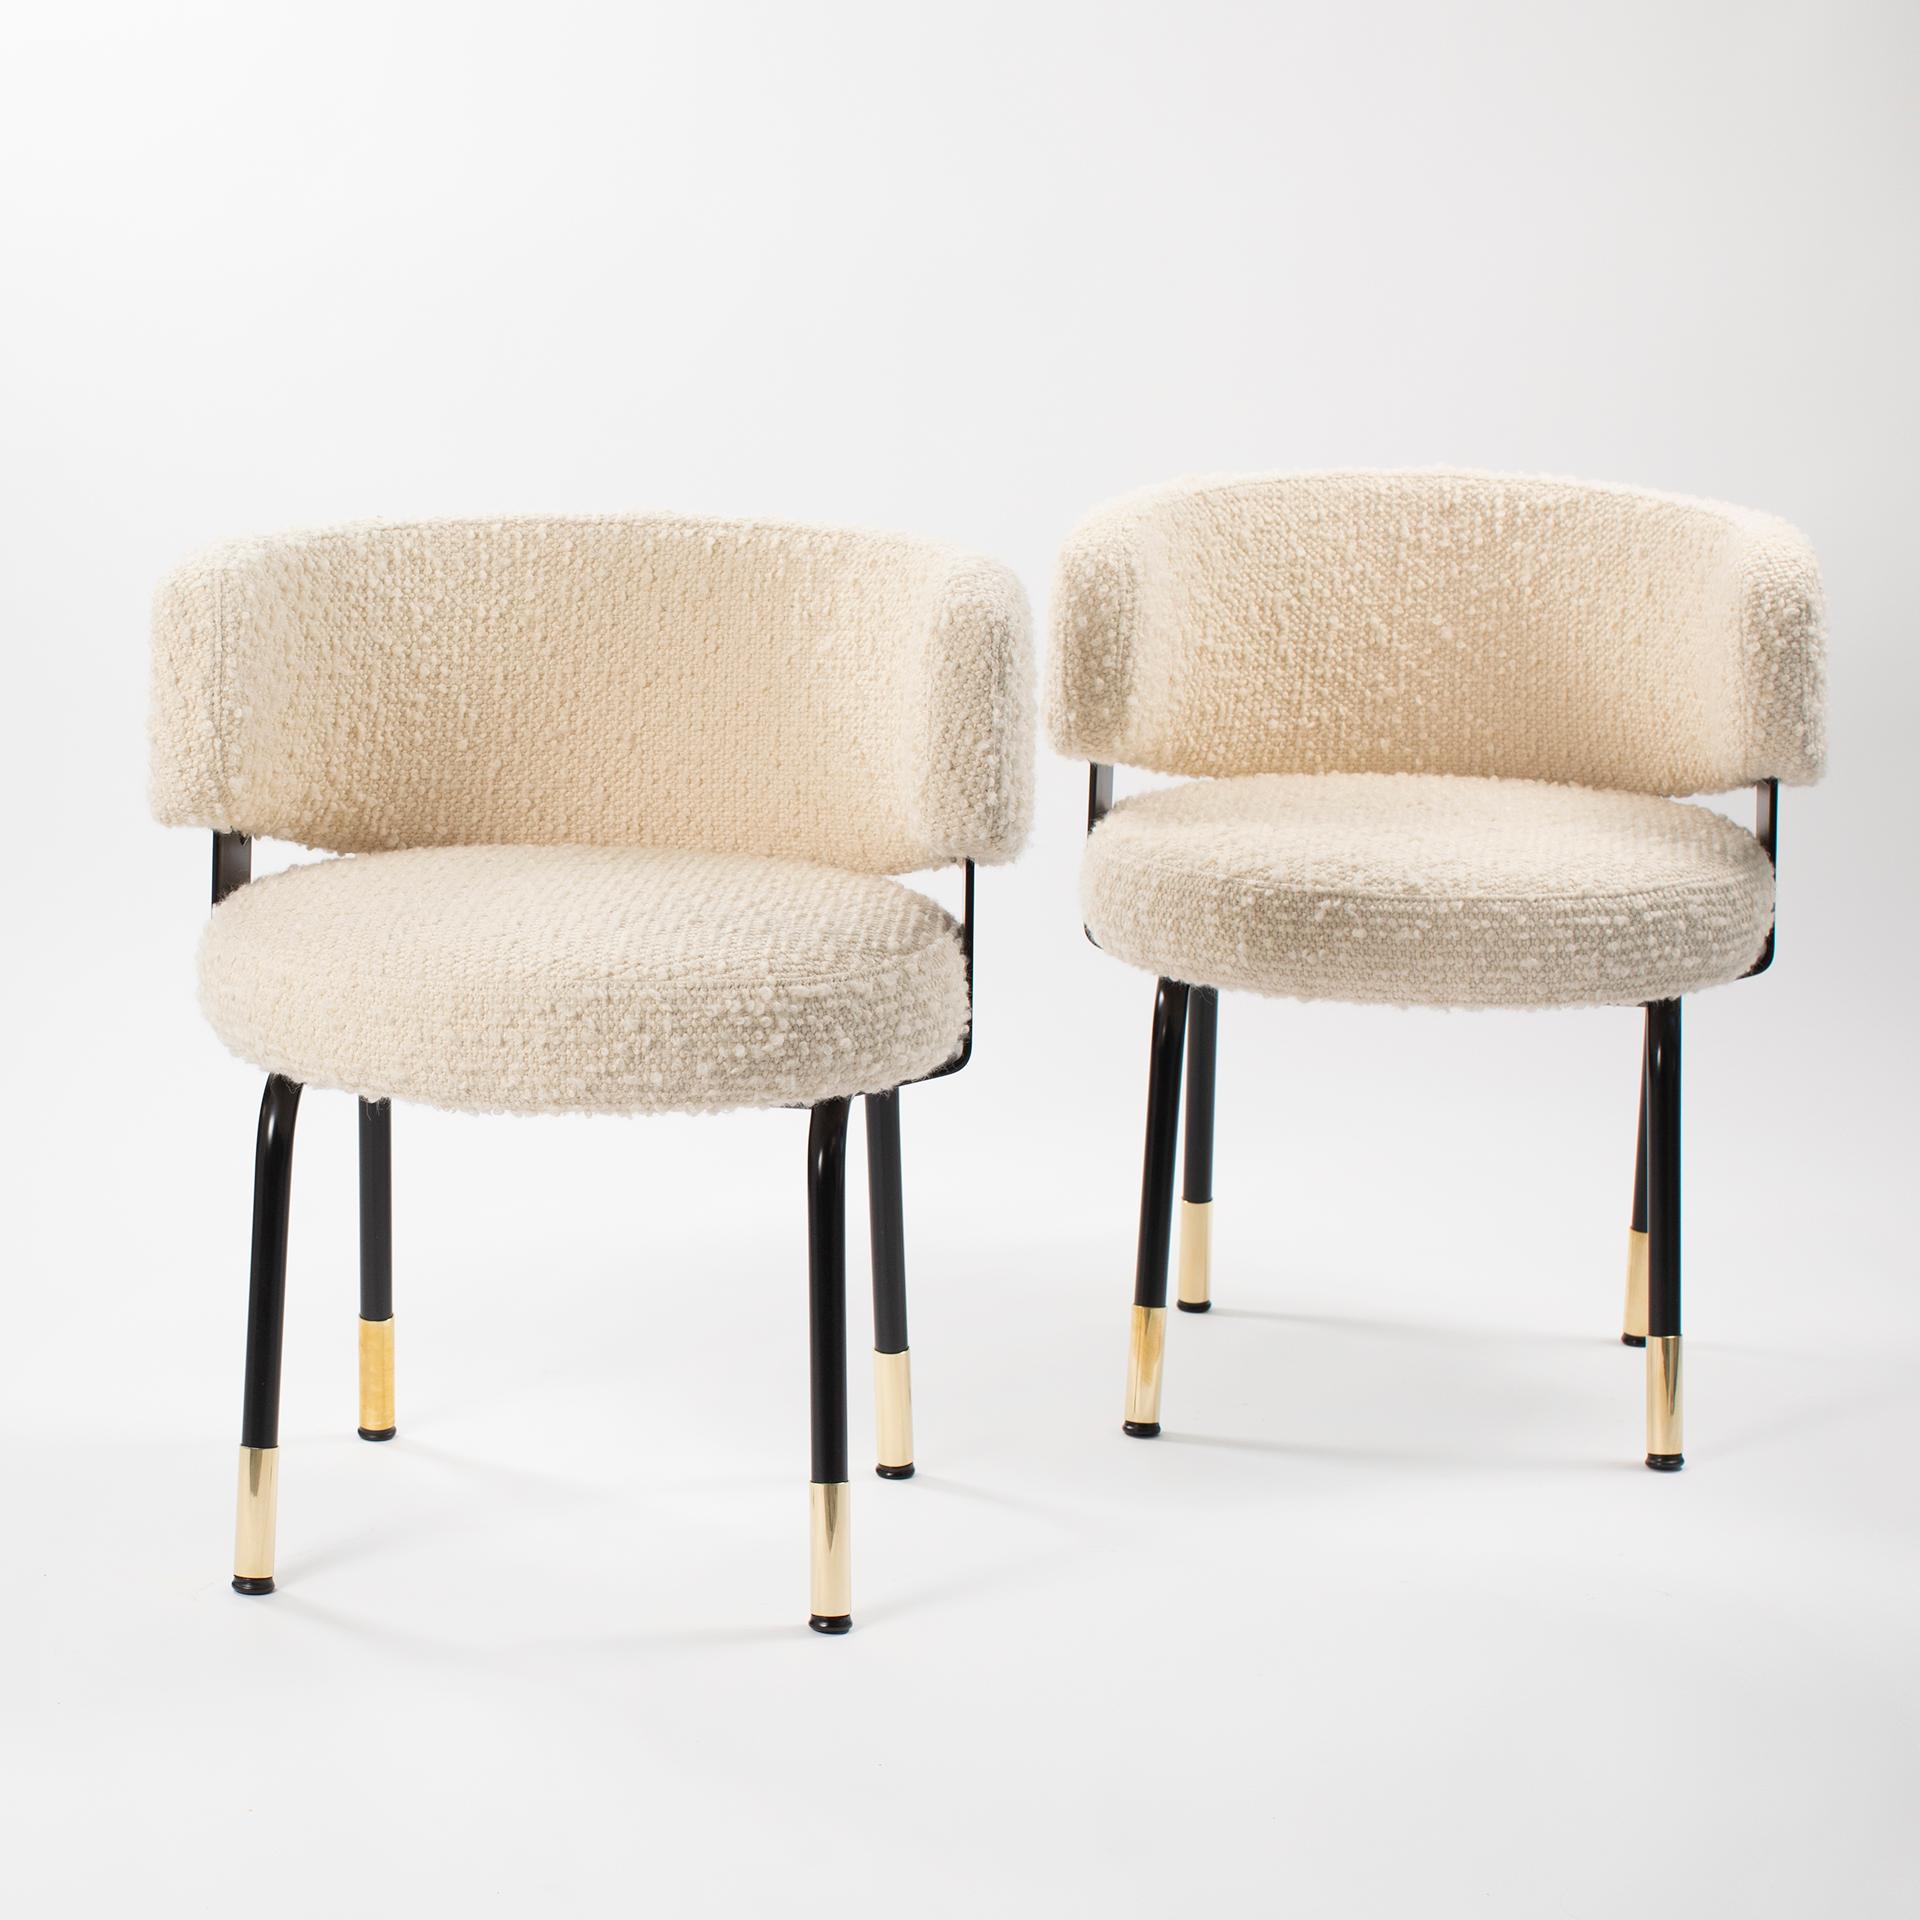 Pair of extravagant black and white Formanova armchairs covered with bouclé fabric Italy 1970s.

Formally very mature pair of armchairs manufactured by the company FORMANOVA.
The rounded and well upholstered backrest and the round, slightly curved